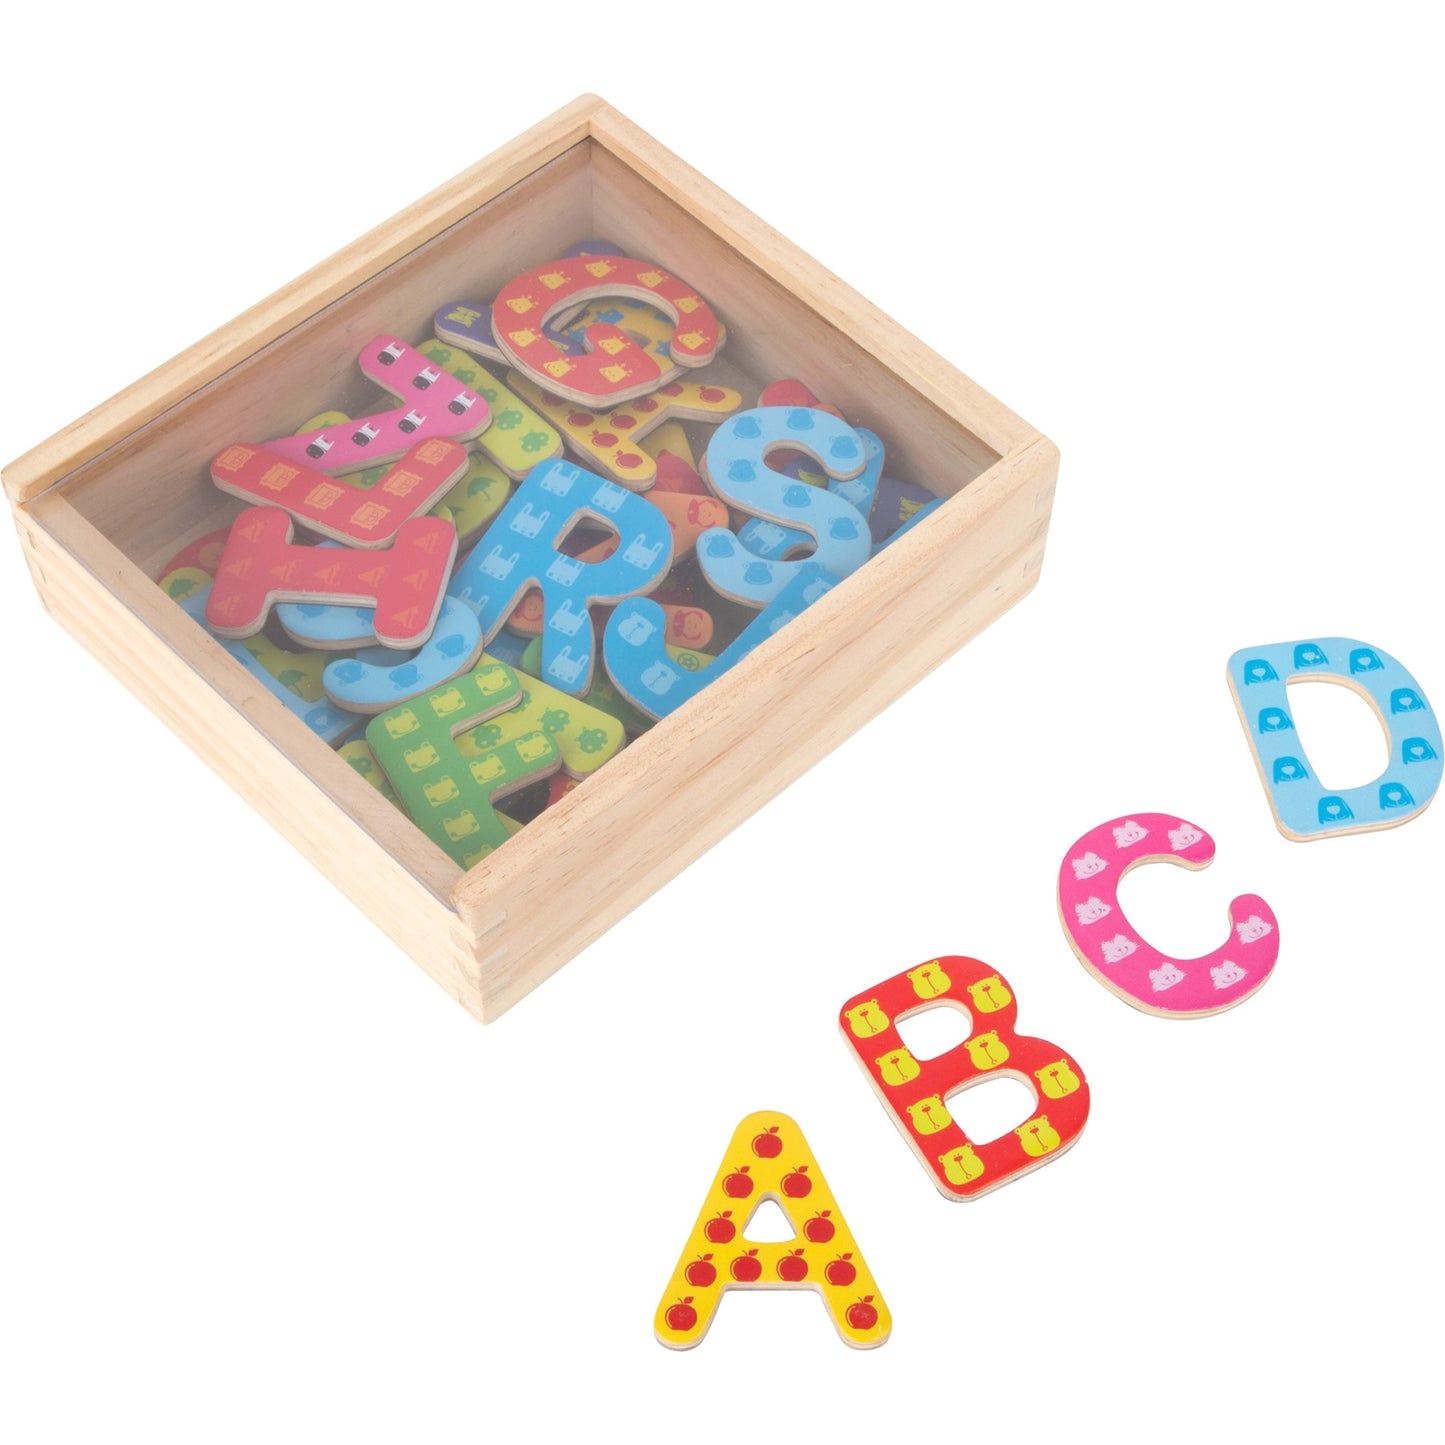 Colorful Magnetic Letters